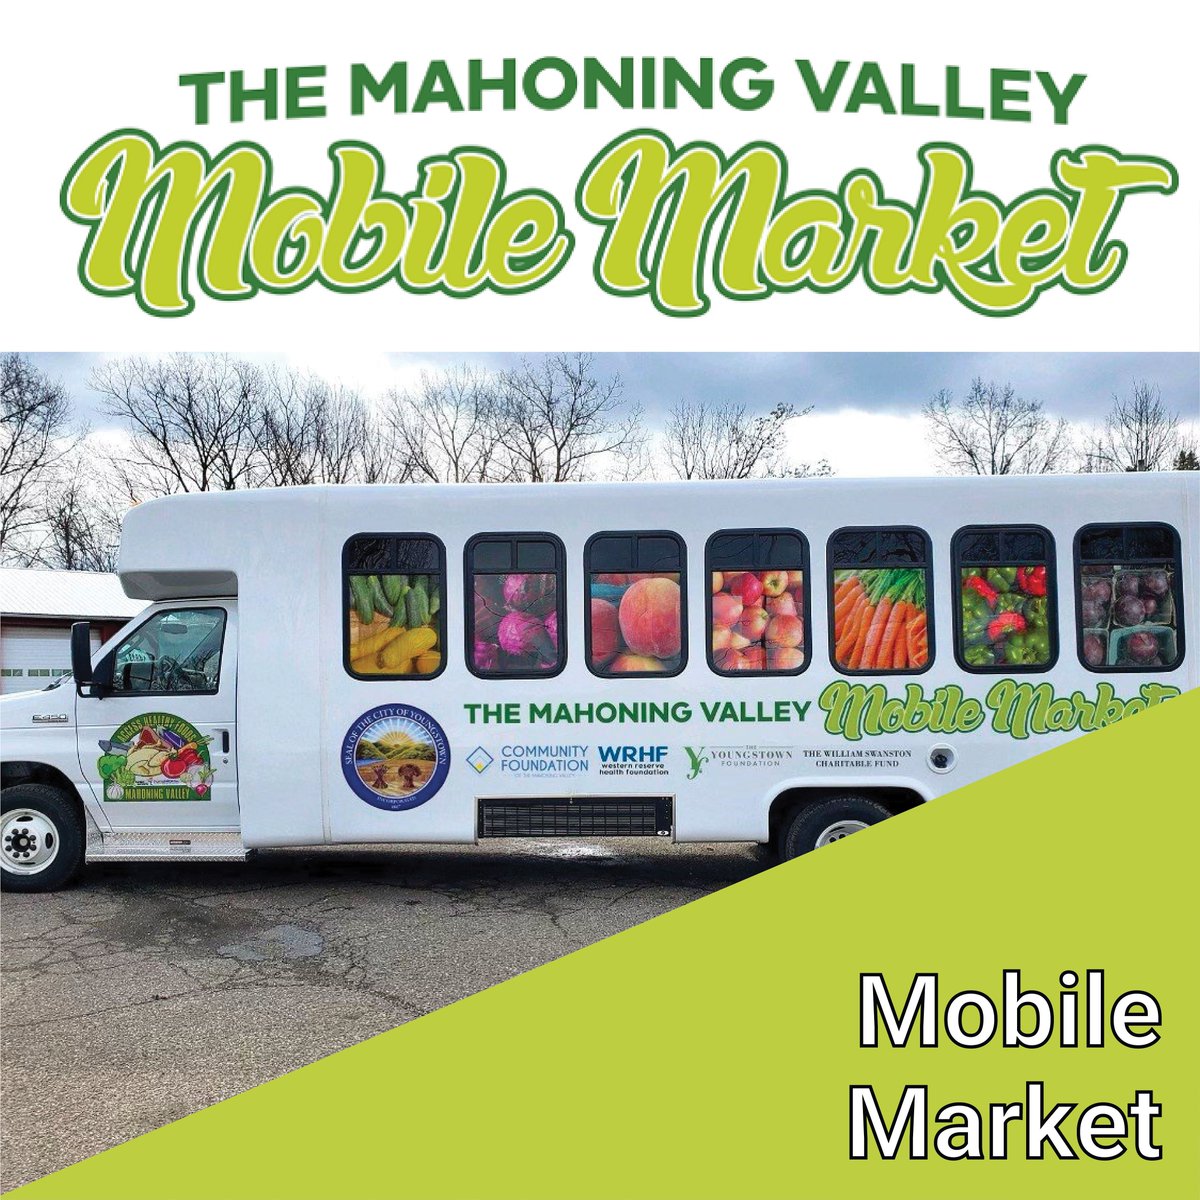 Shop for some freshly-grown produce at the Mobile Market at Main Library. Thurs., May 16, 11:30 a.m. - 1:30 p.m.